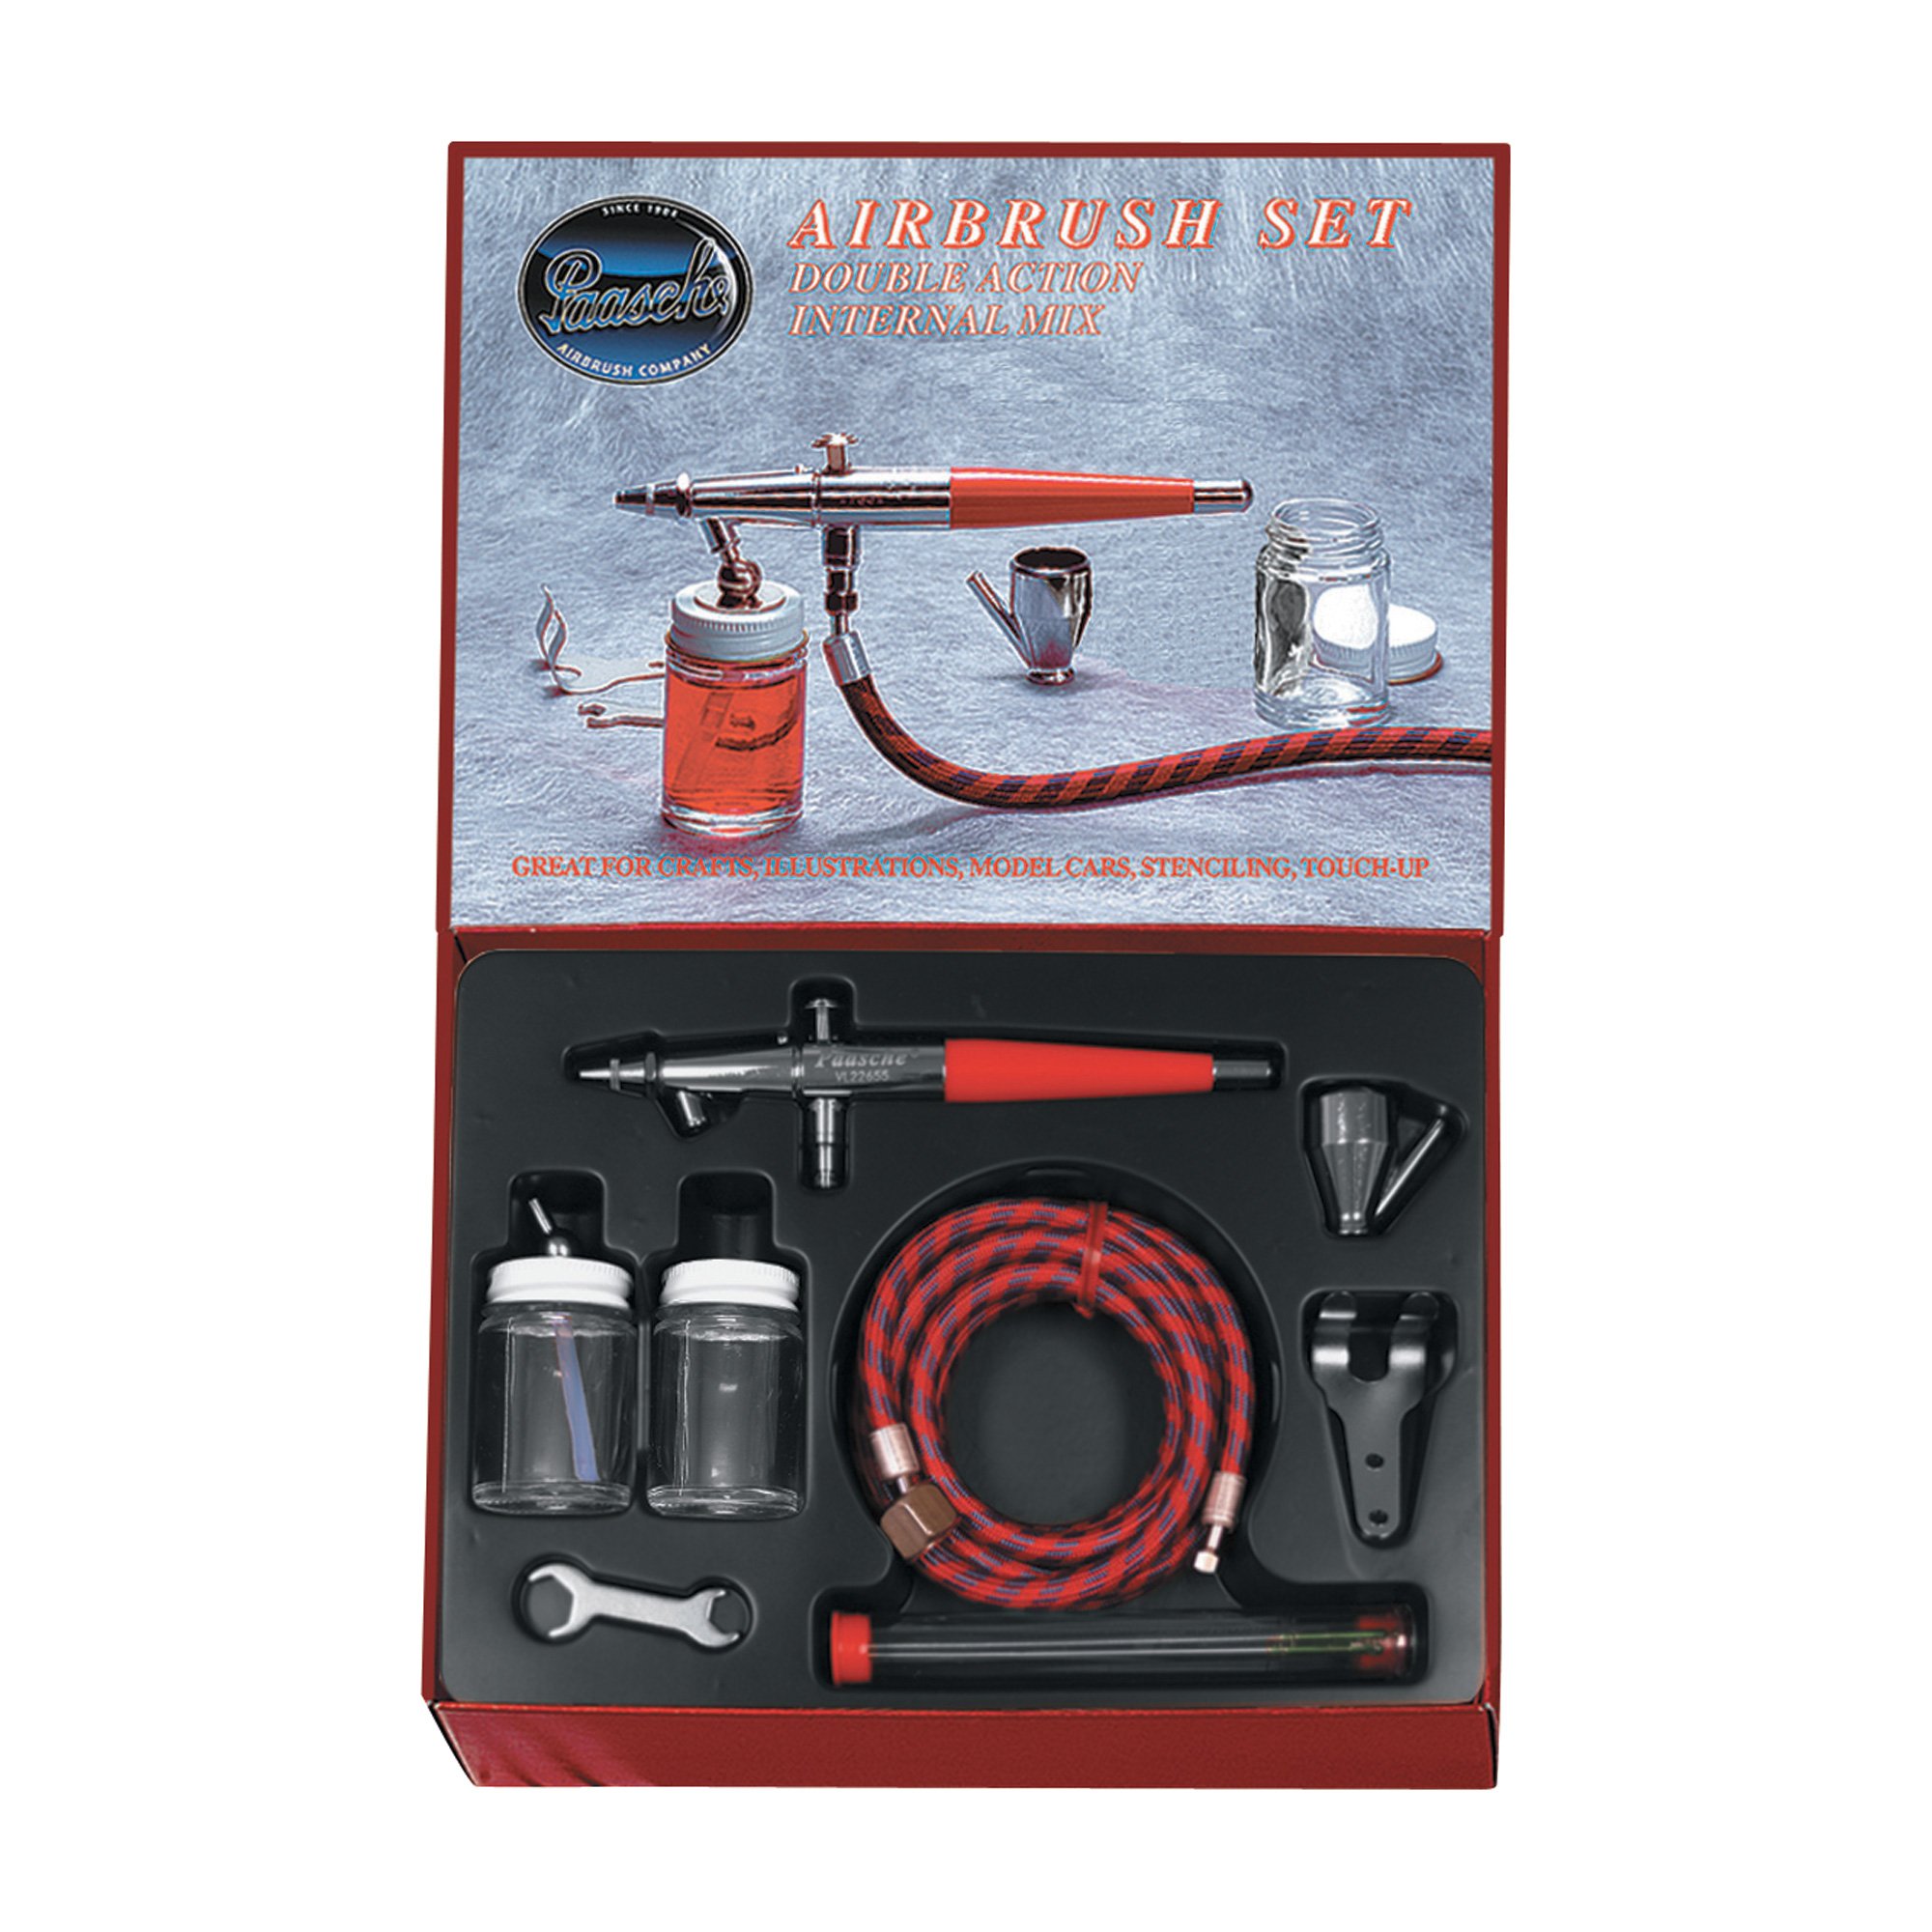 Paasche Airbrush Kit Contains 3 Different Airbrushes